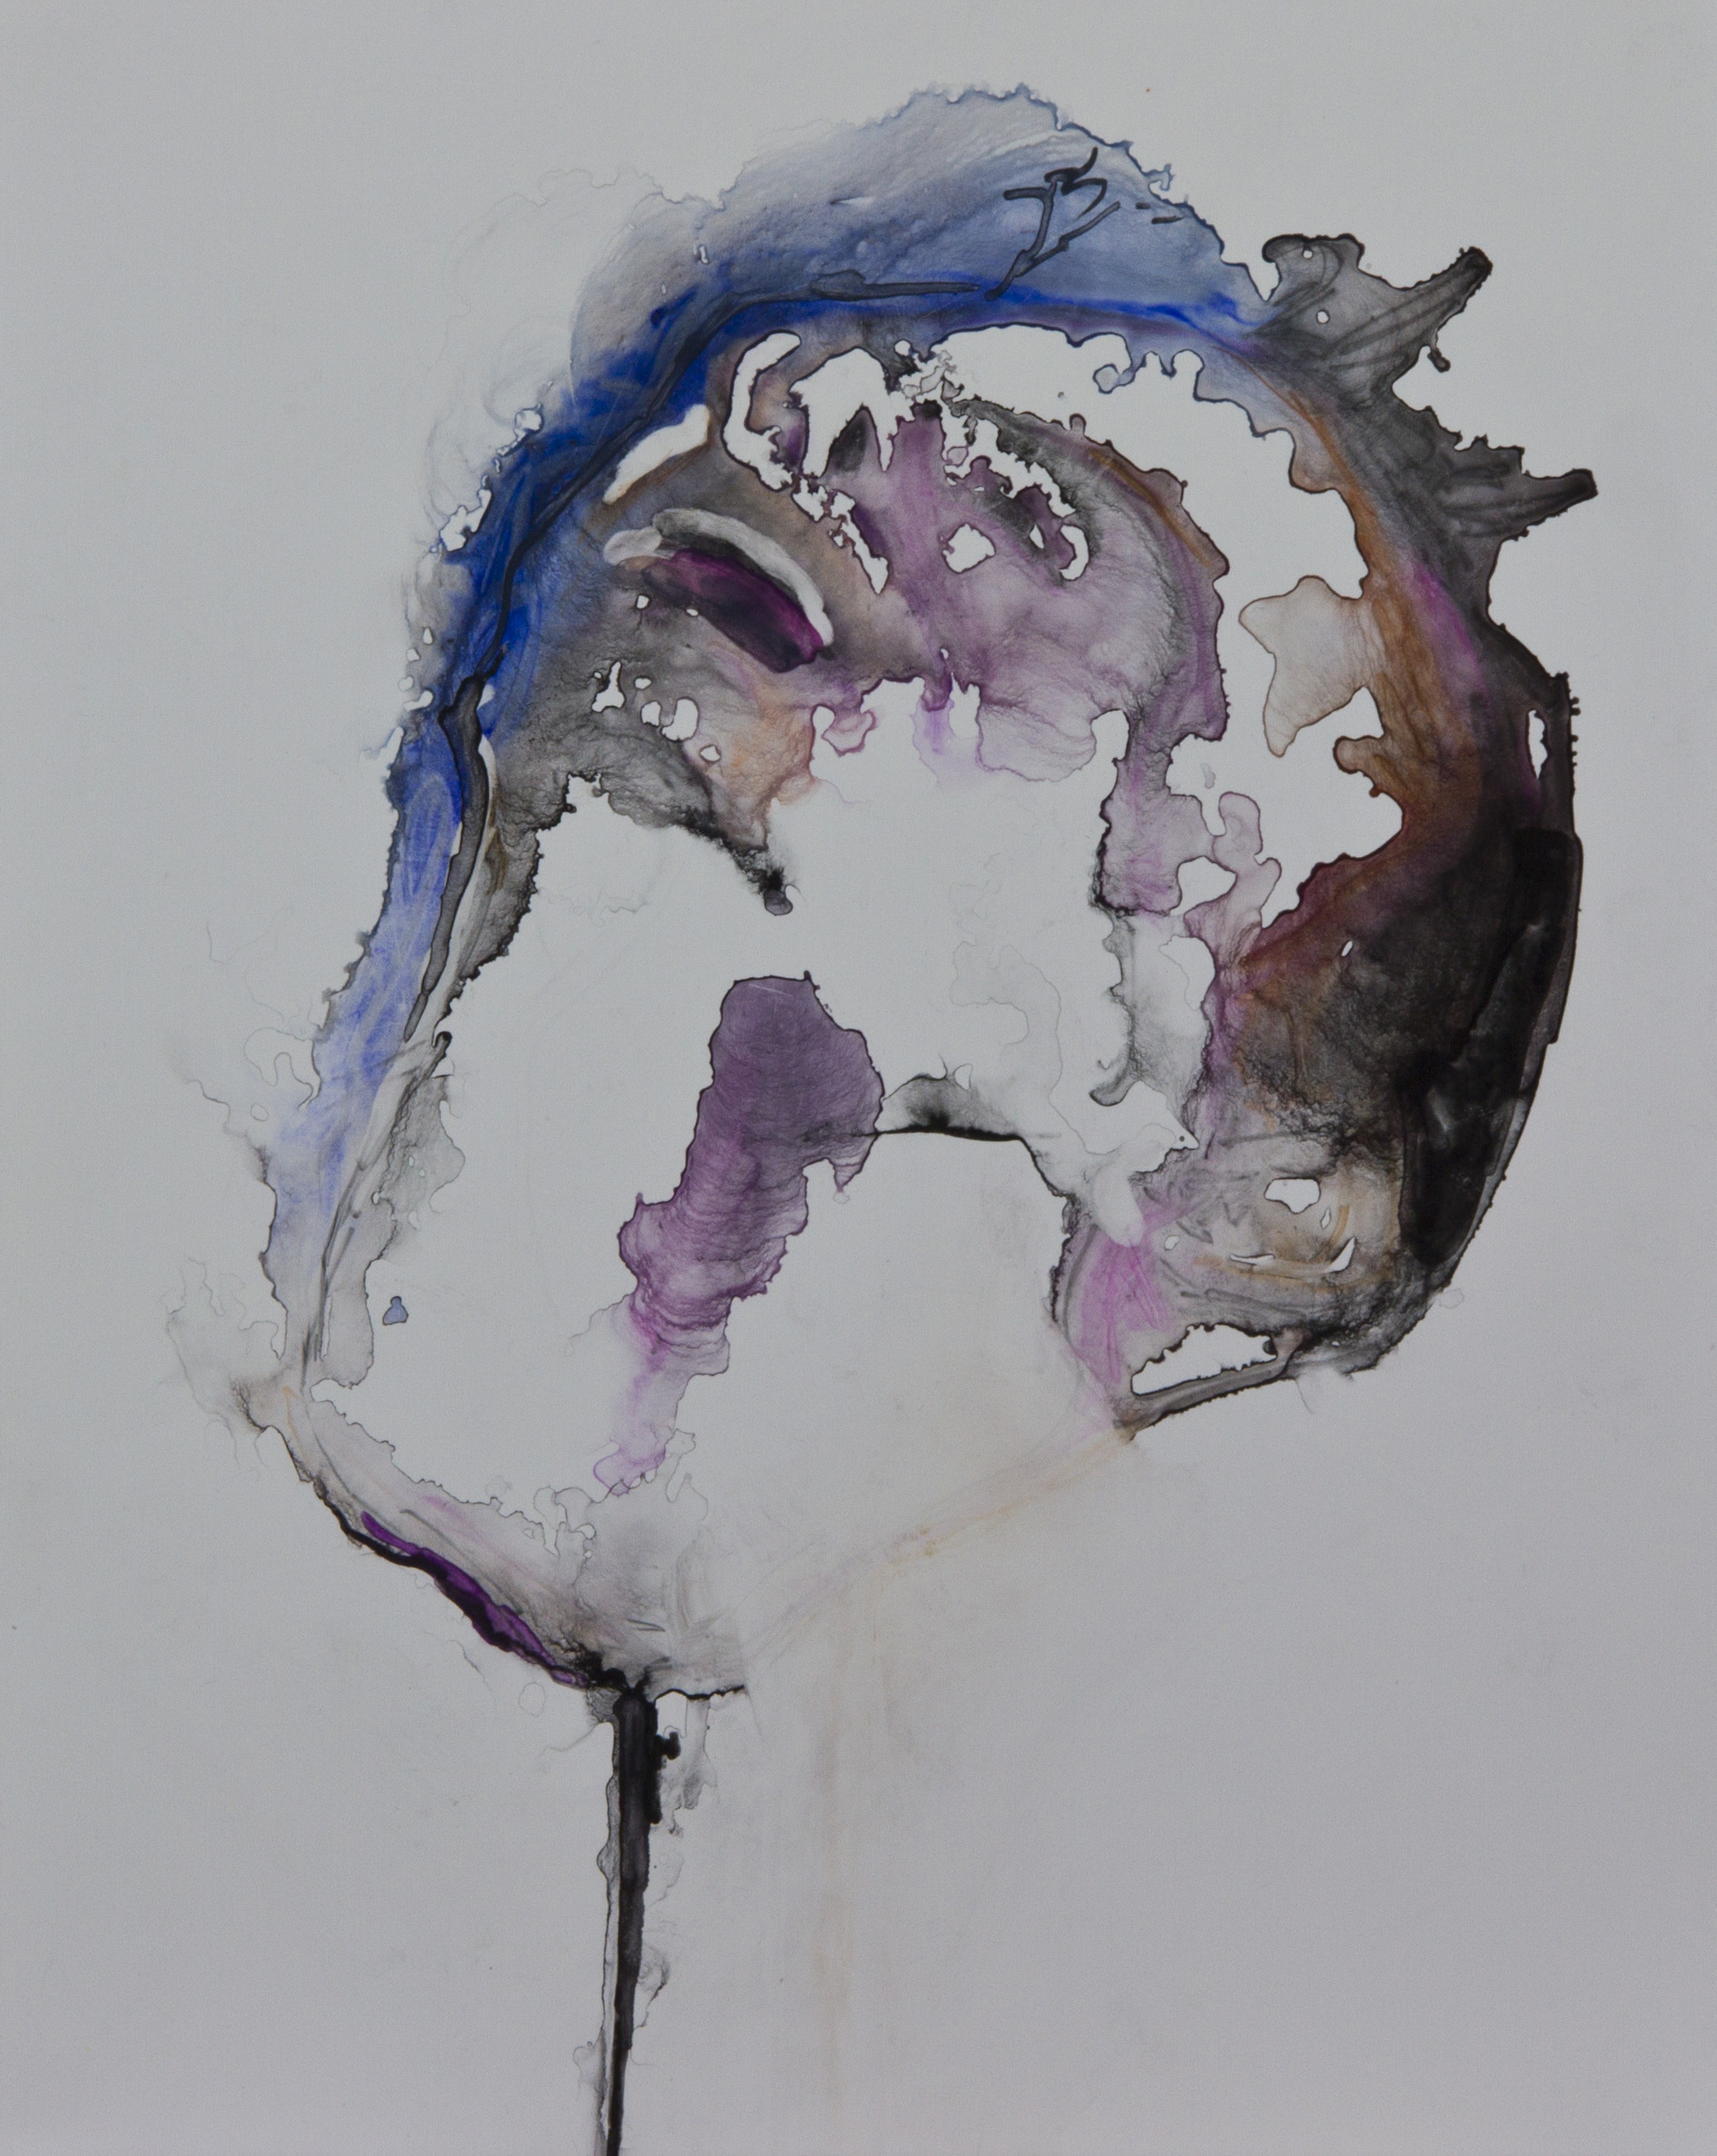 Specimen 1, 2011, watercolor on polypropylene, 11x14 inches